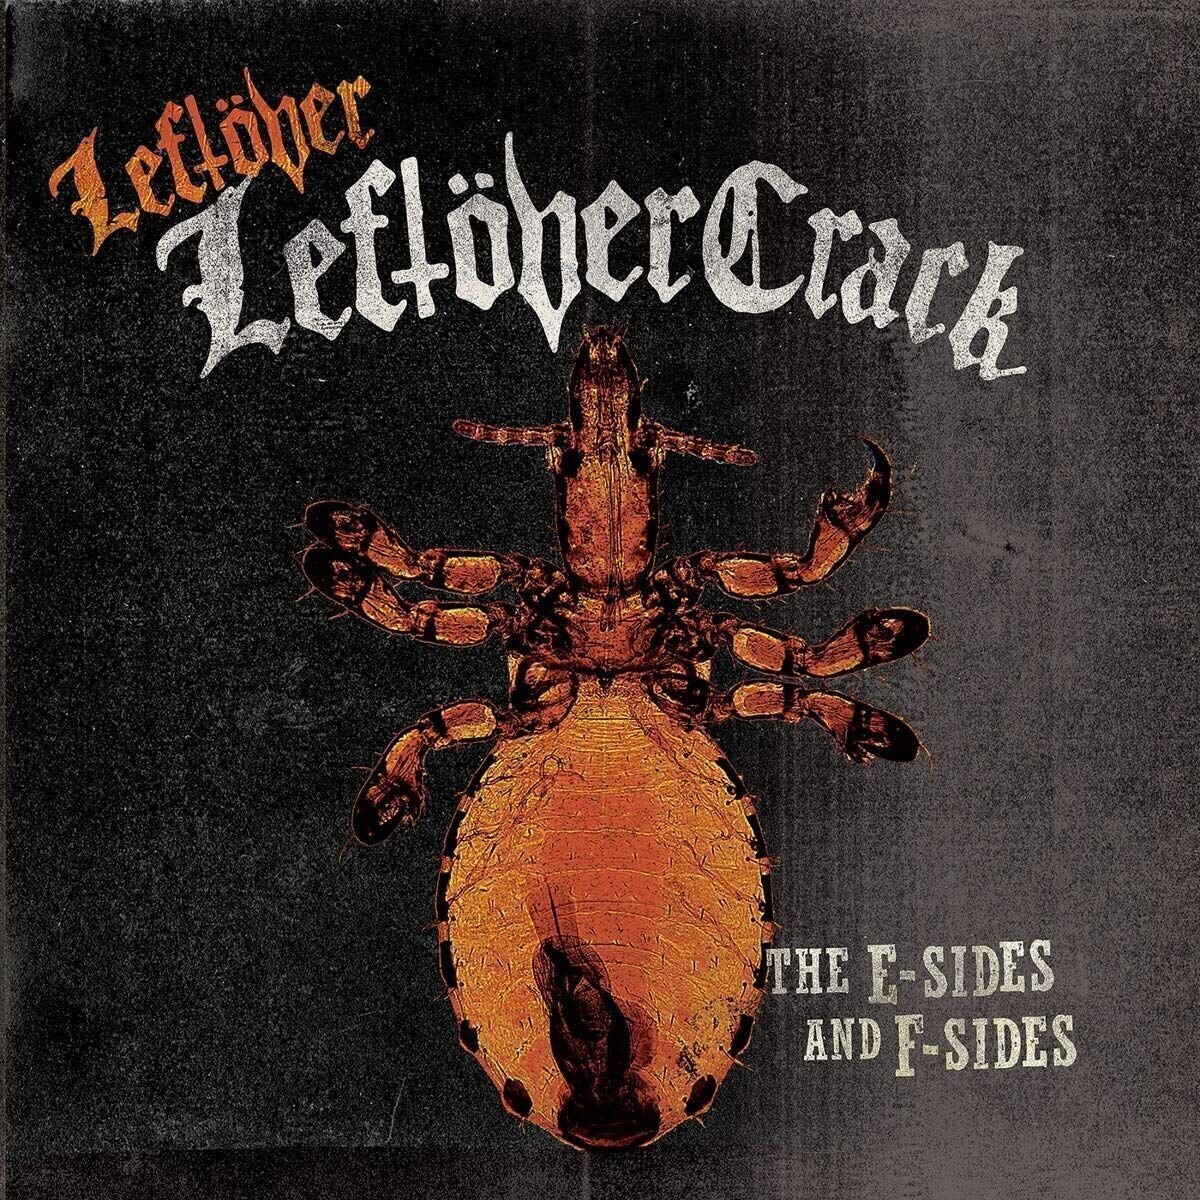 Vinyl Record Leftover Crack - The E-Sides And F-Sides (2 LP)